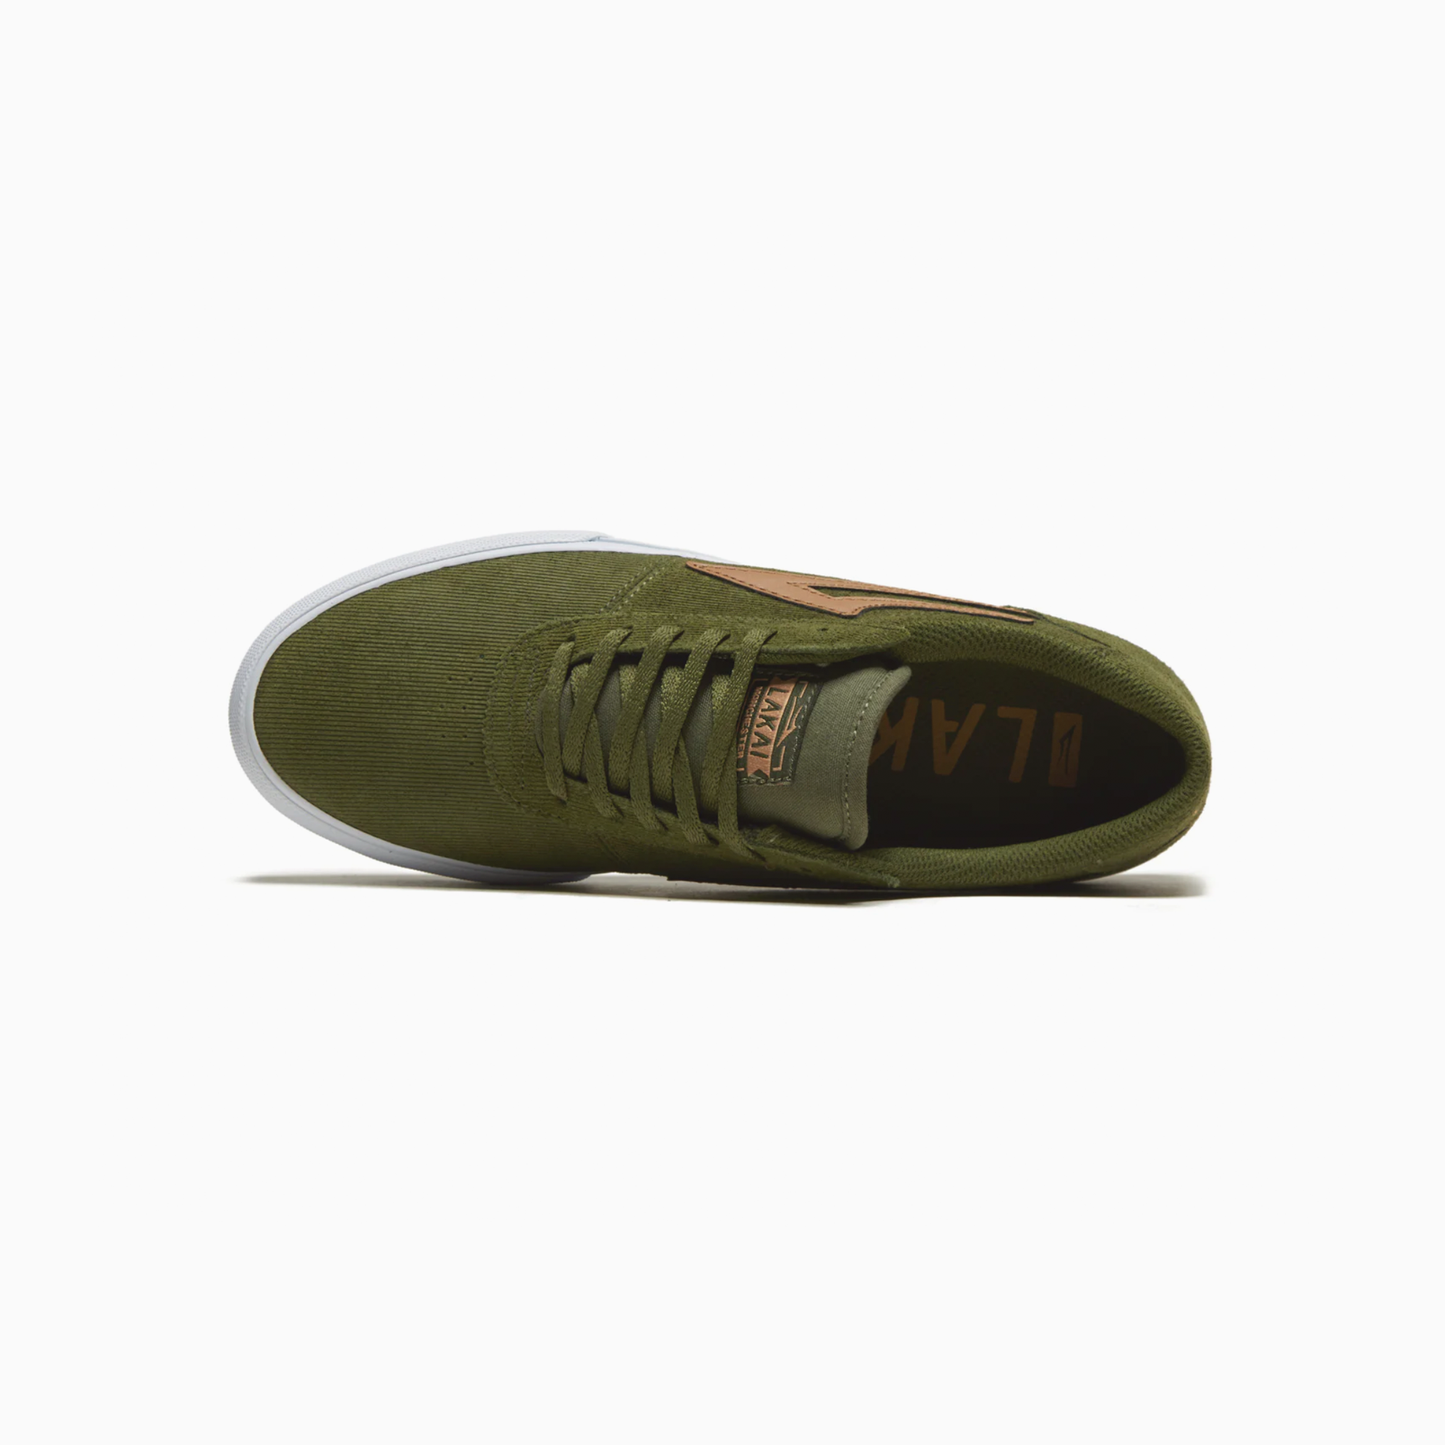 Lakai - Manchester Olive/Cord/Suede